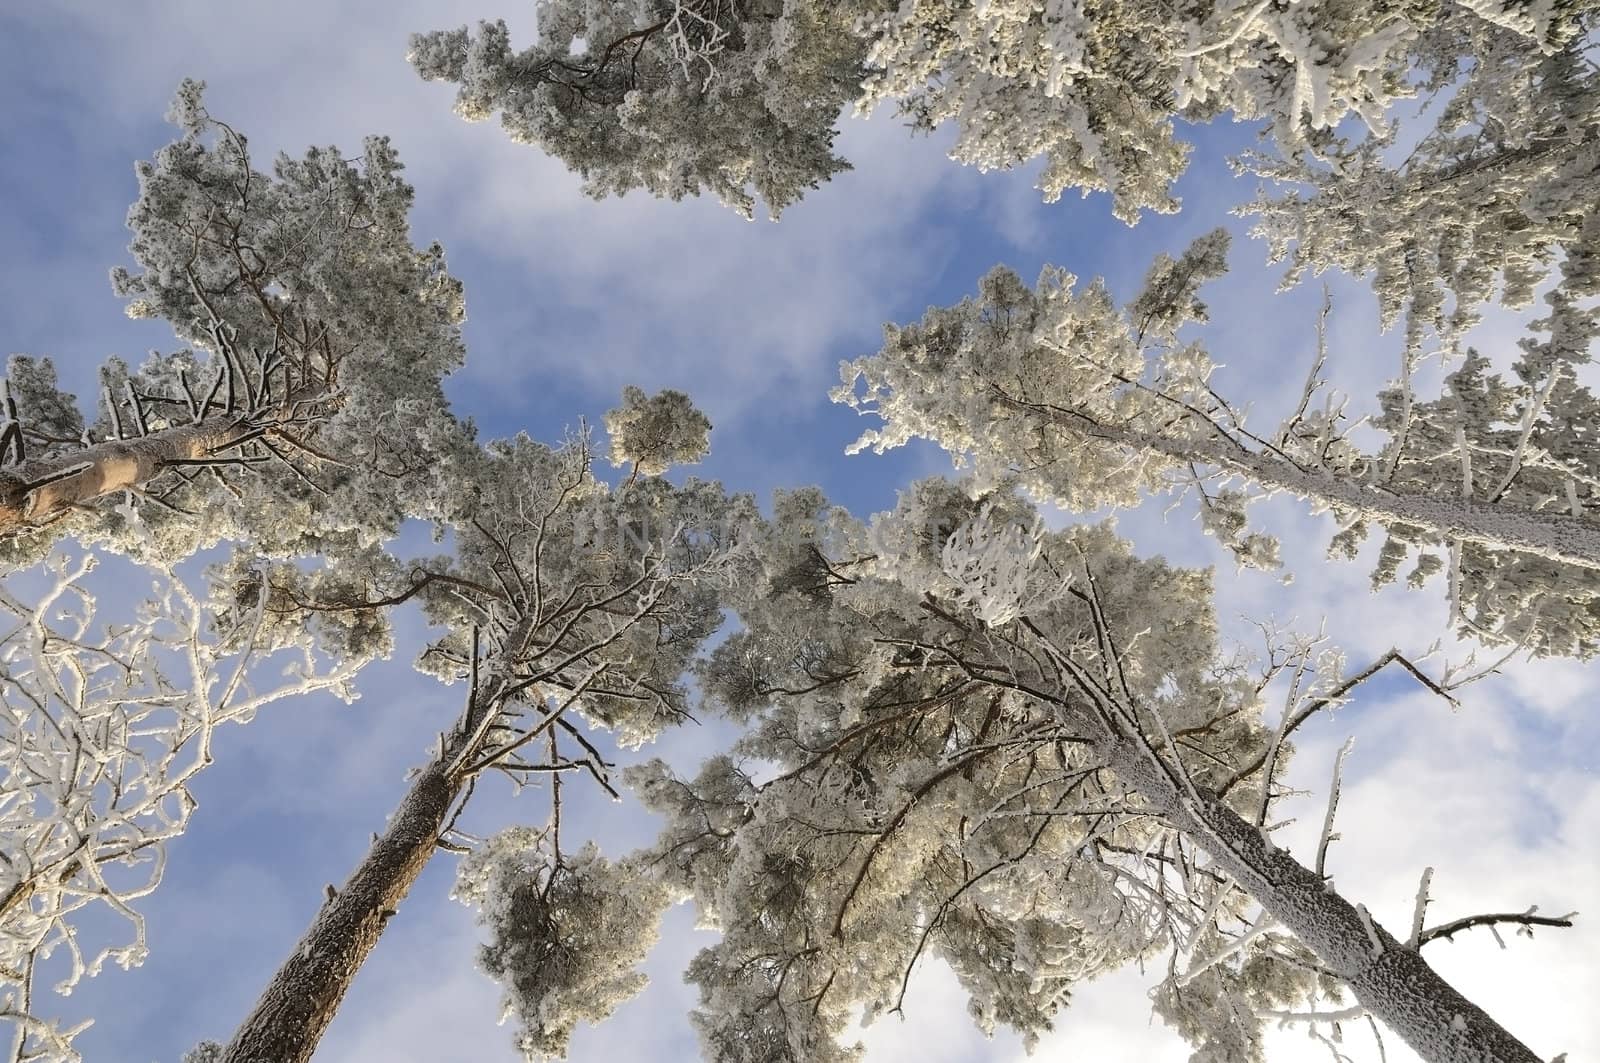 bright tall trees under fresh snow over blue sky